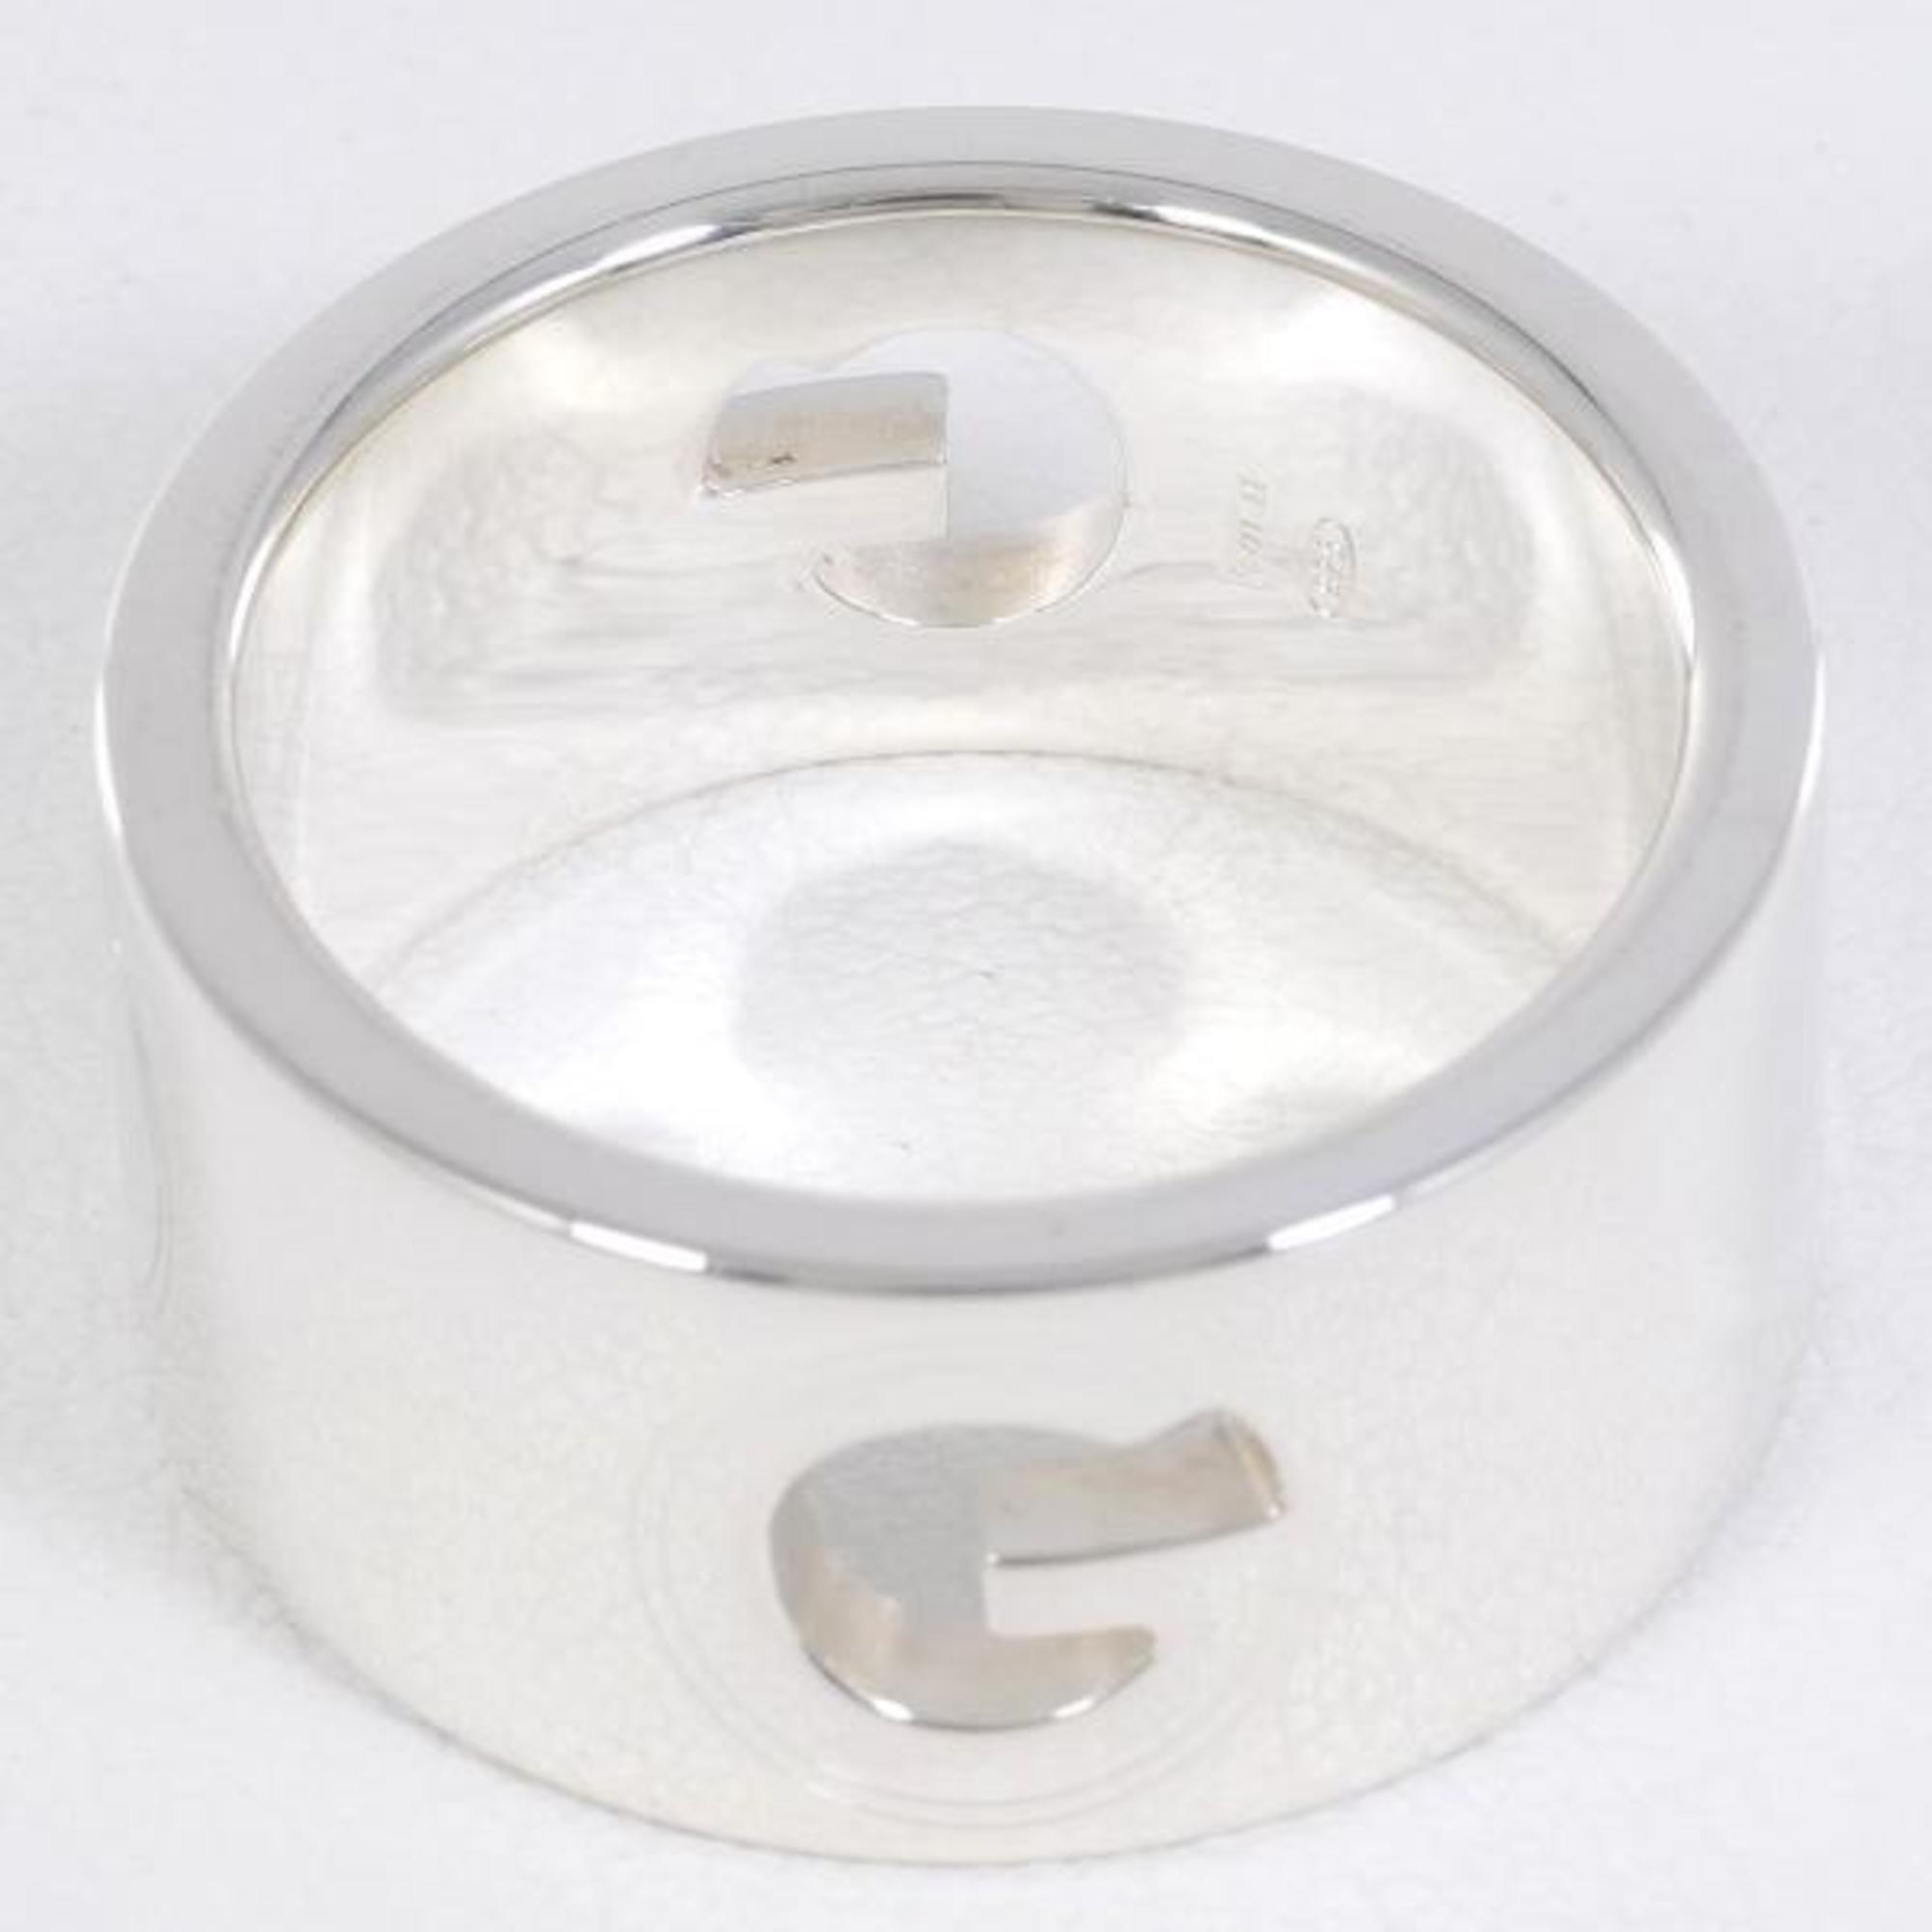 Gucci G logo silver ring size 14 gross weight about 10.8g jewelry